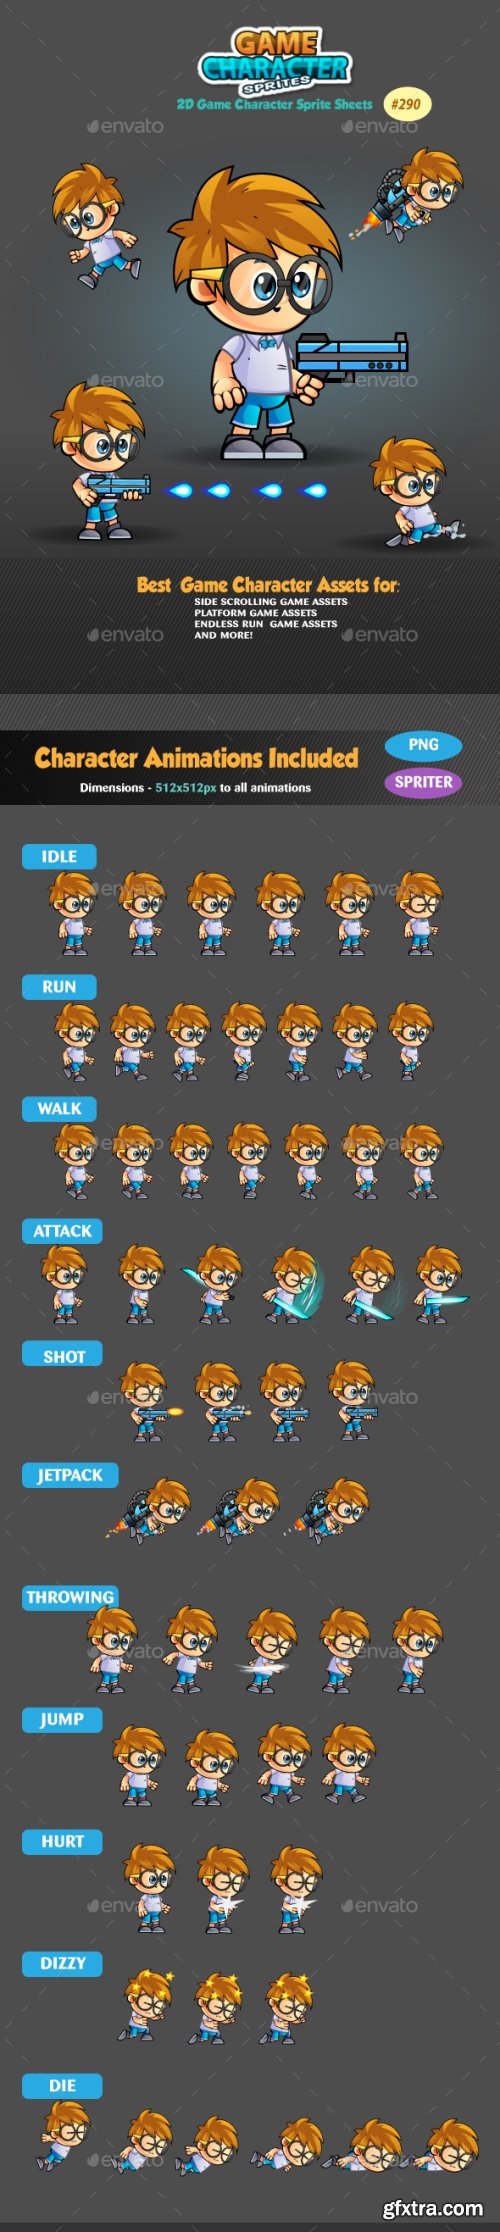 Graphicriver - 2D Game Character Sprites 290 19168020